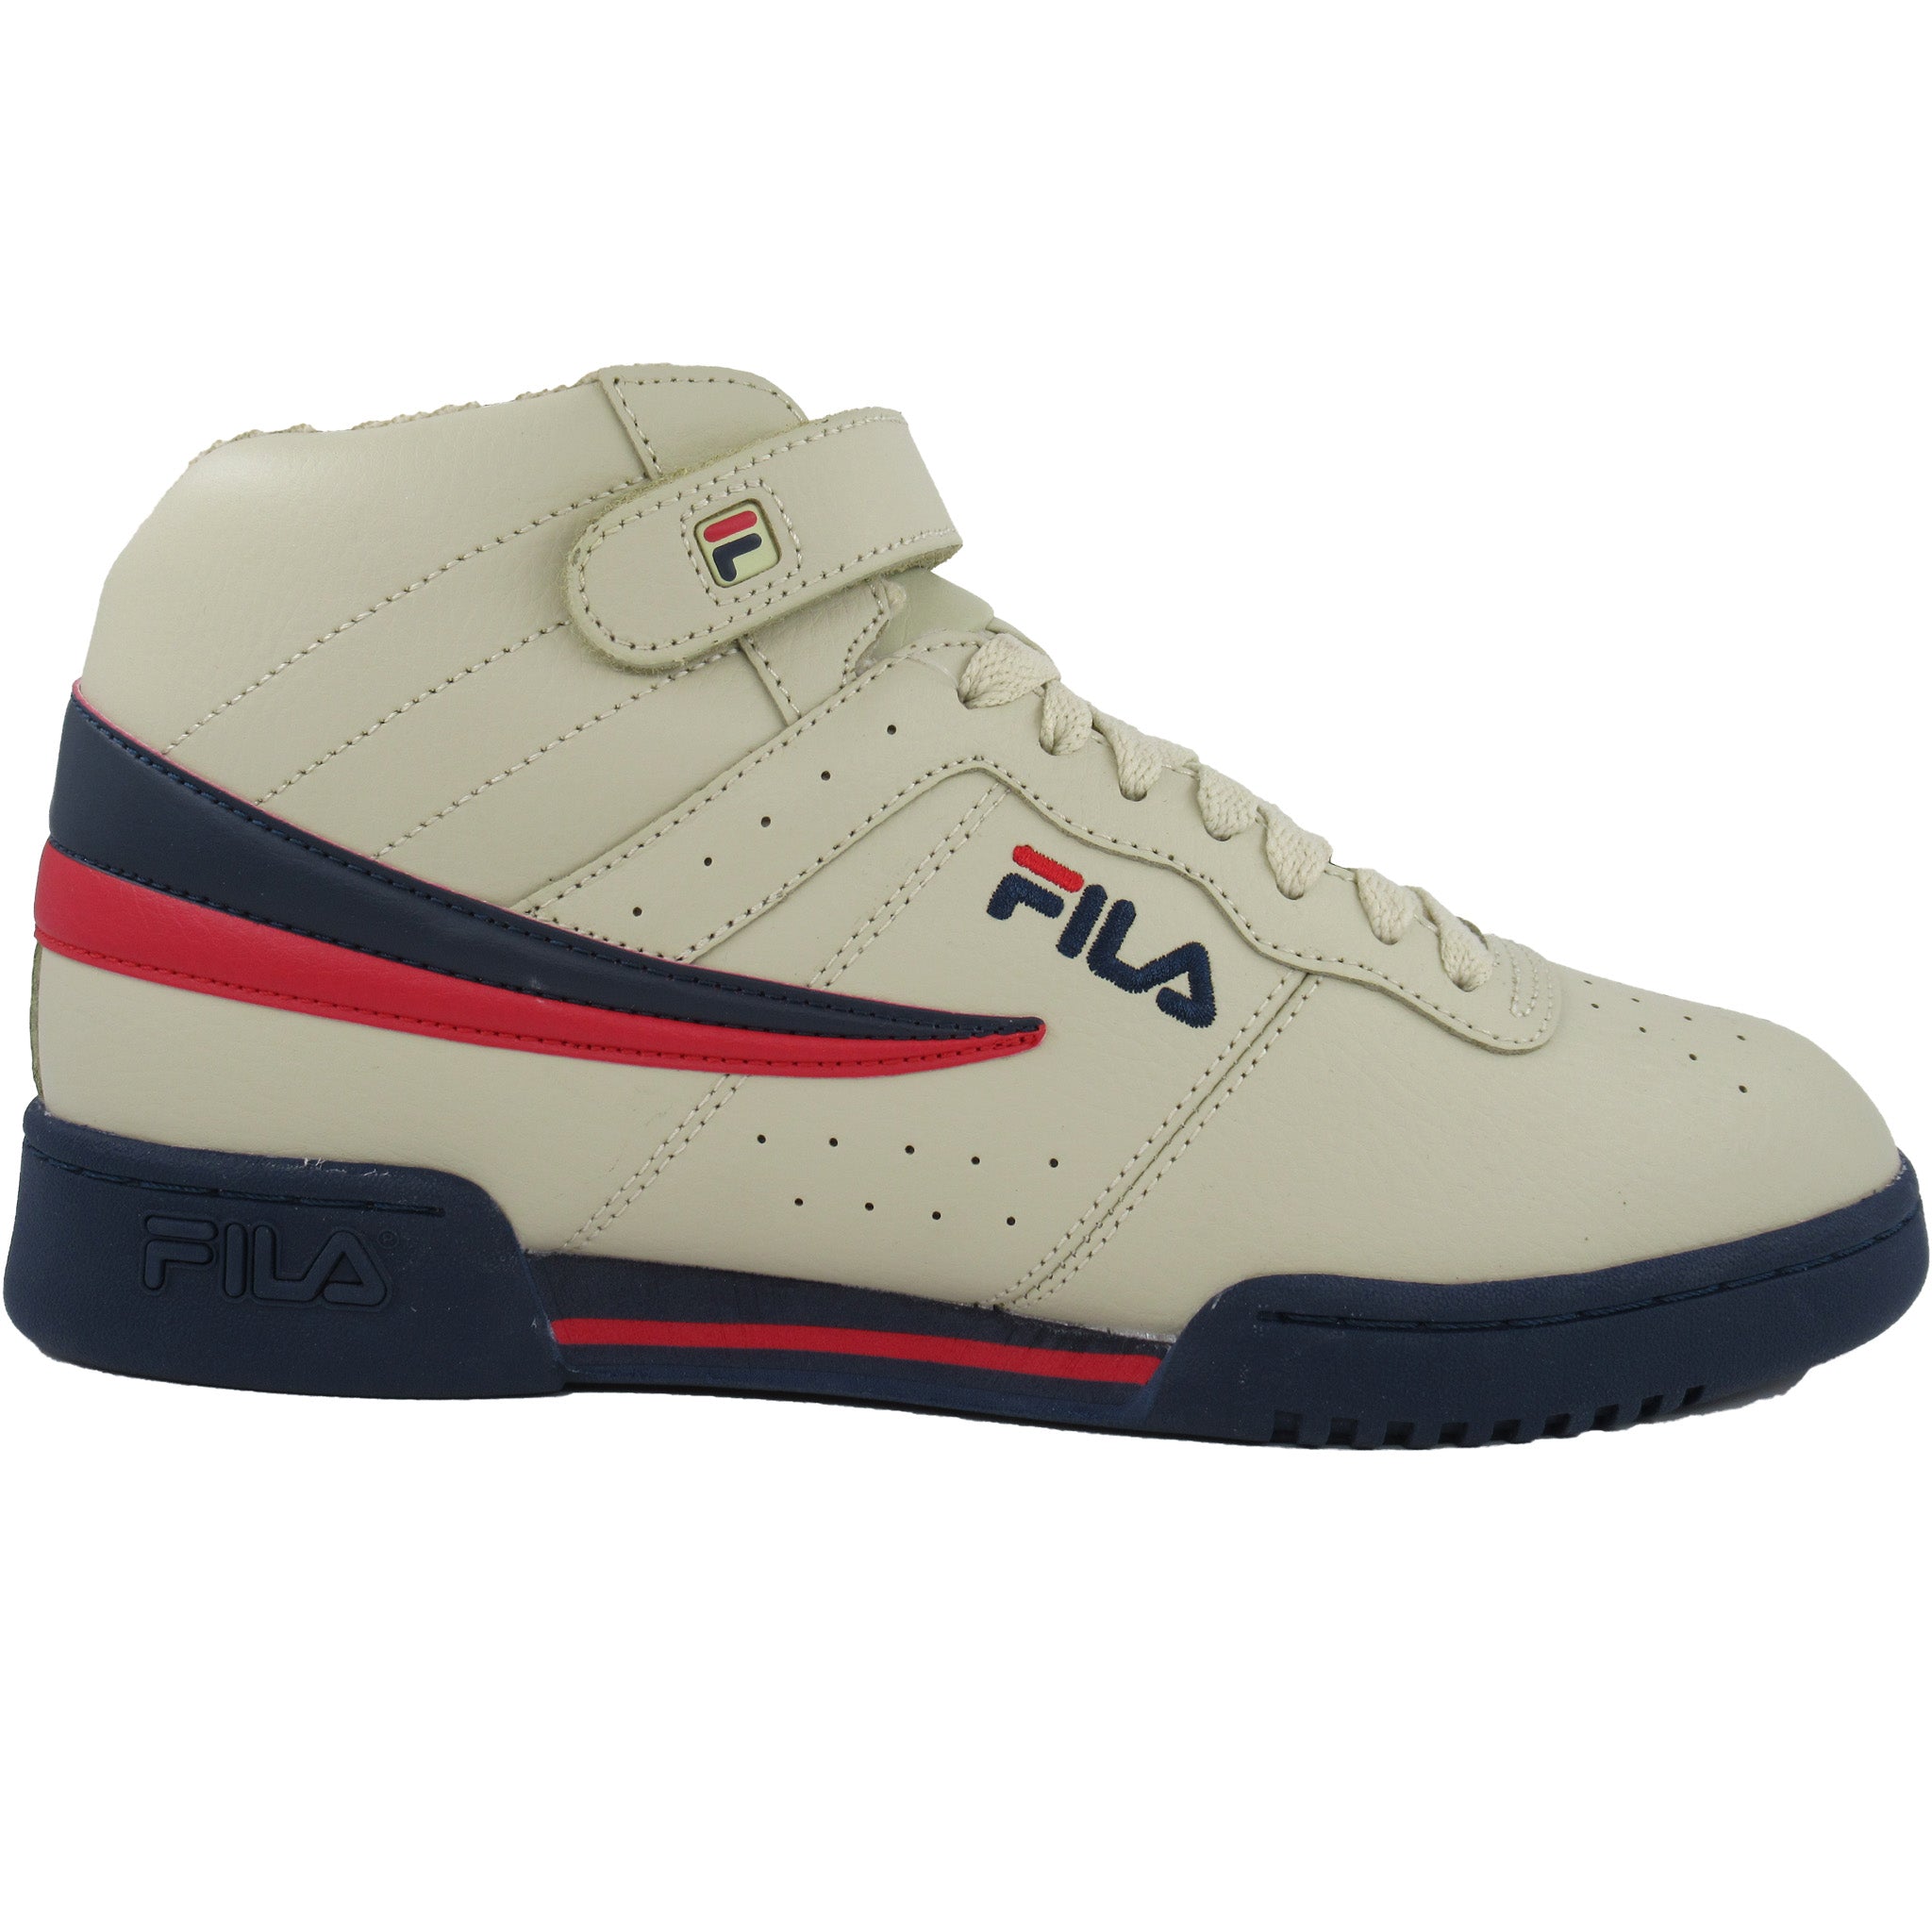 shoes basketball mid fila mens casual leather classic f13 sneakers sell nba trainers